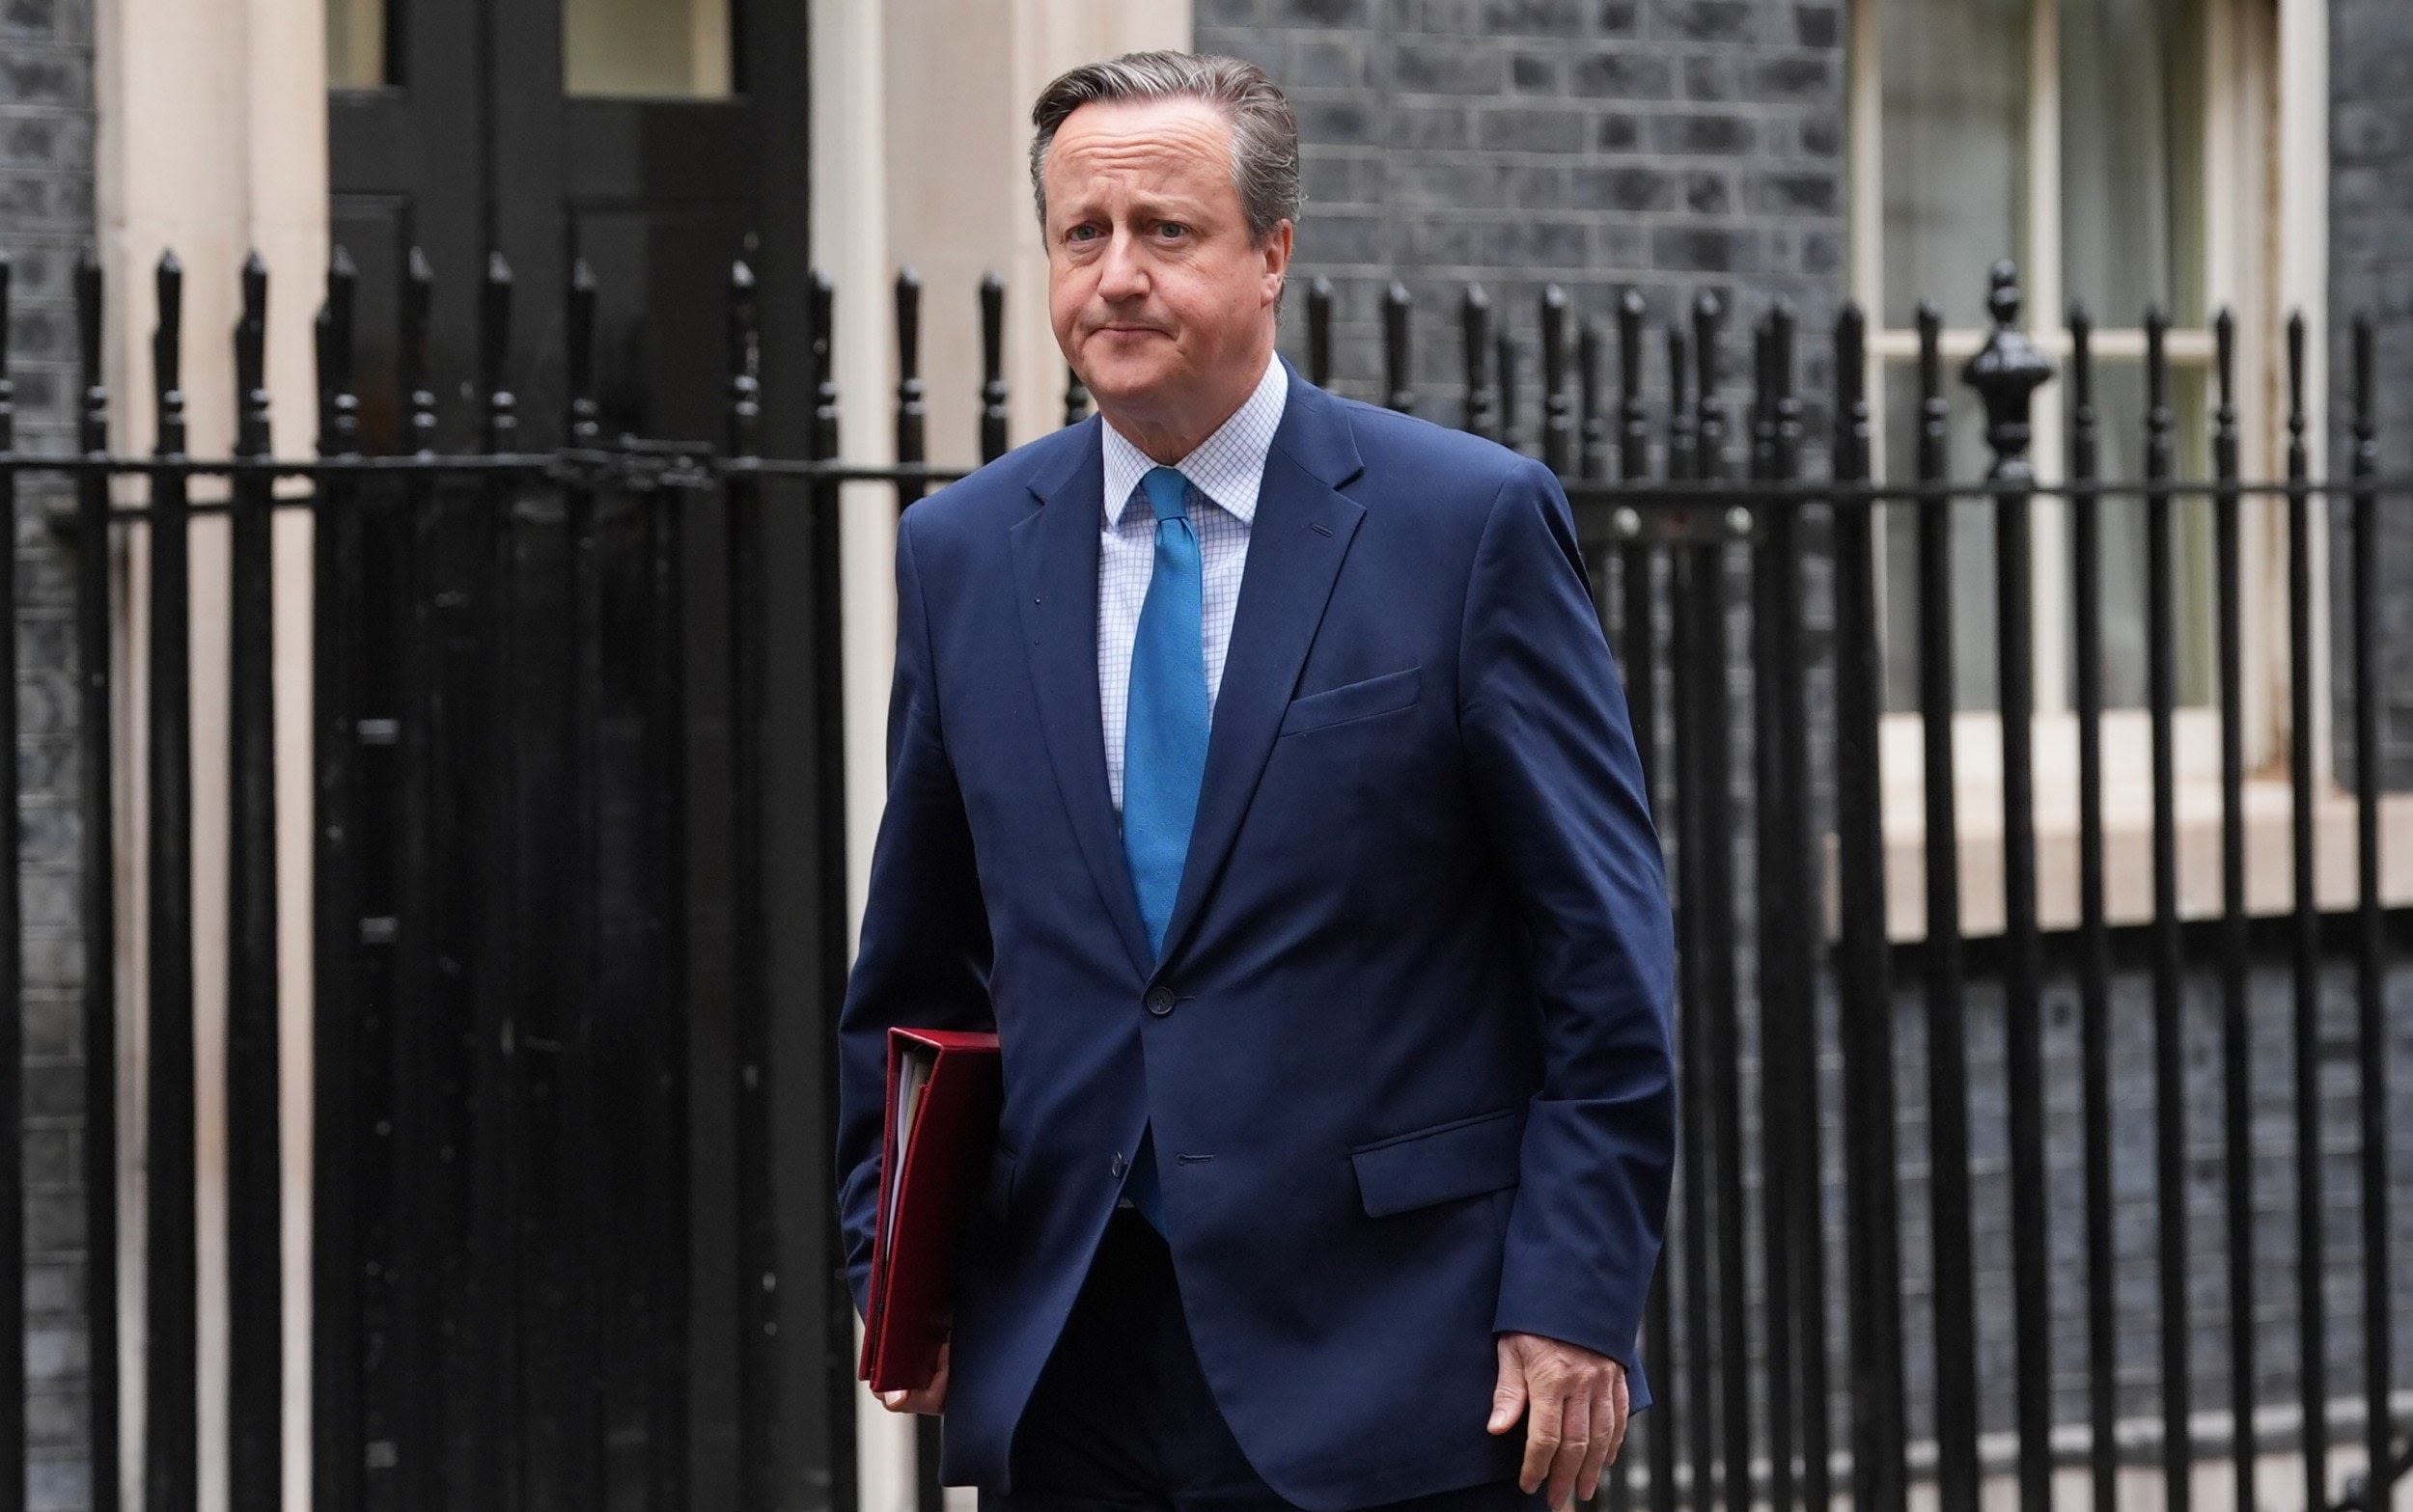 David Cameron is this election’s biggest loser